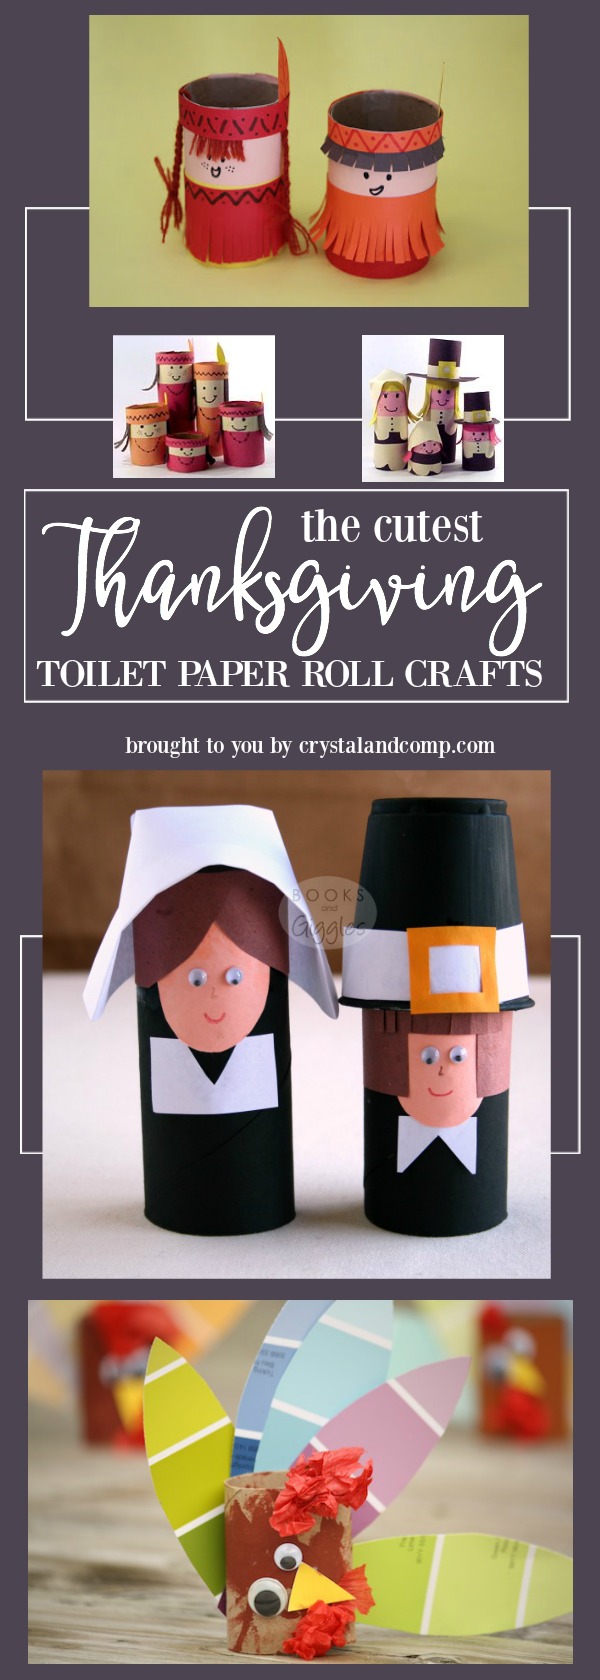 12 Super Cute Thanksgiving Toilet Paper Roll Crafts